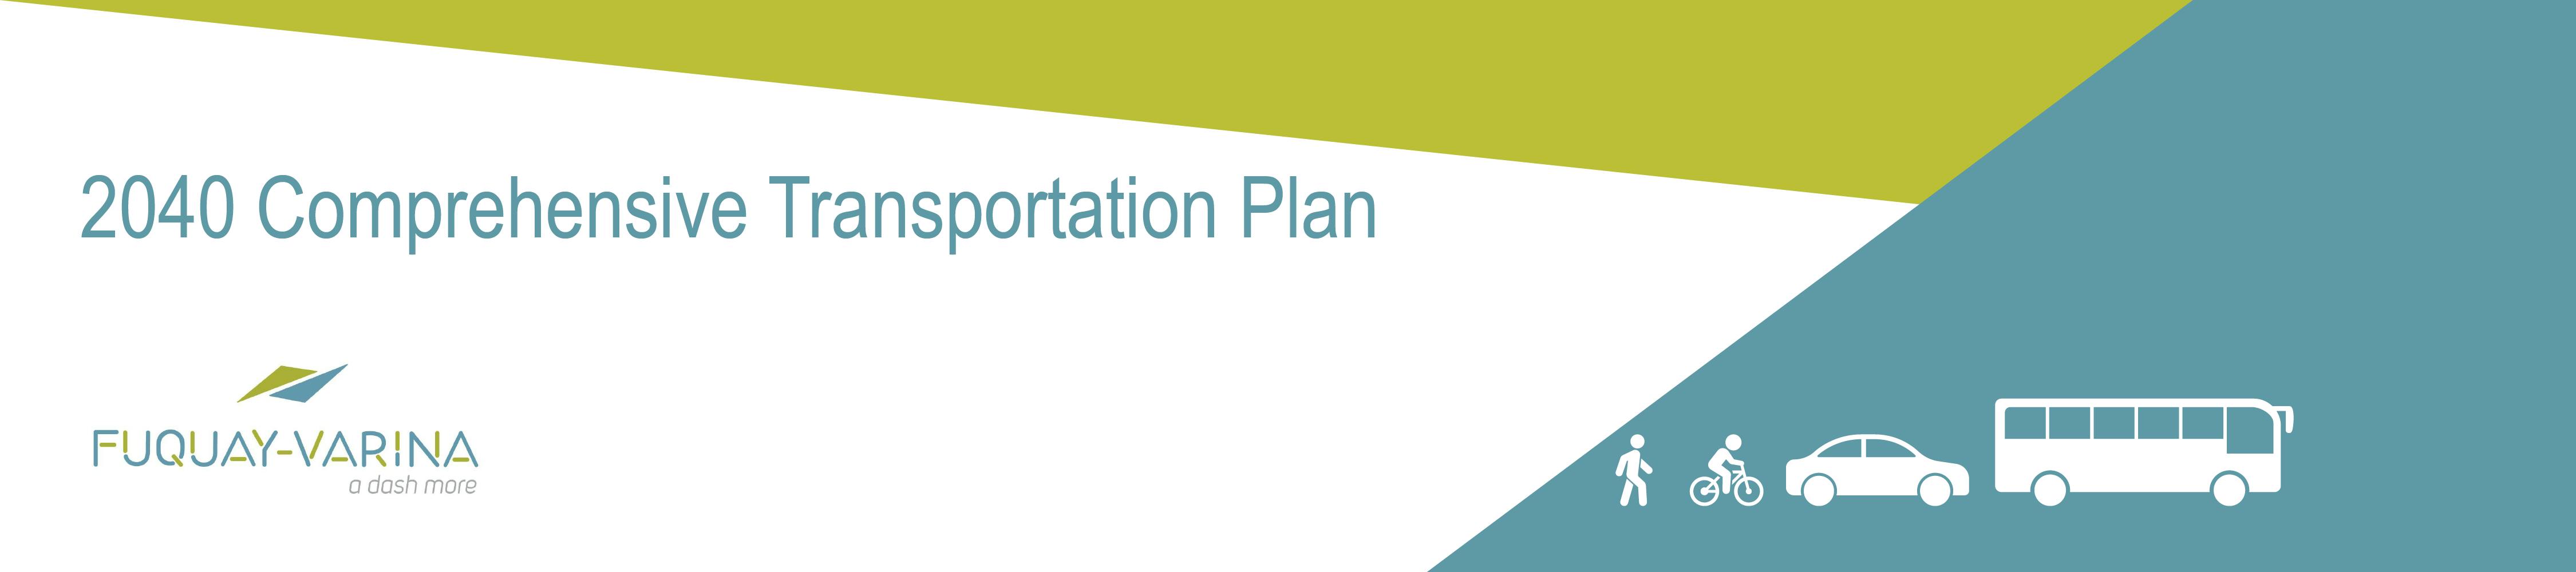 Welcome to the Town of Fuquay-Varina 2040 Comprehensive Transportation Plan project webpage.